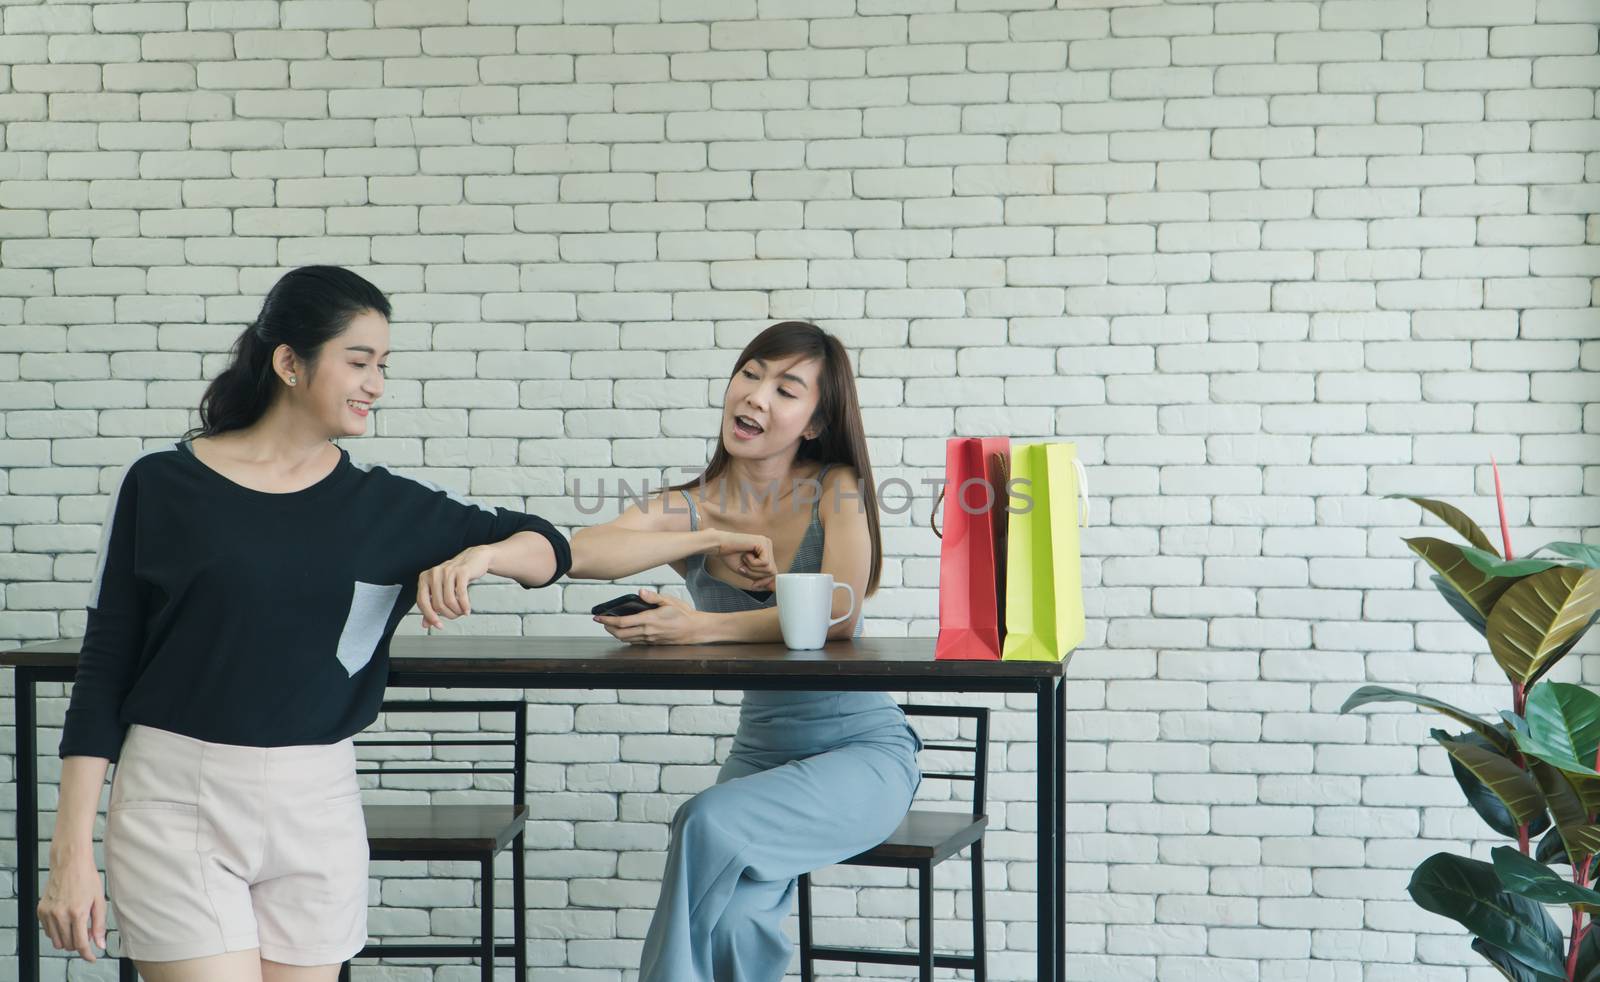 Two Asian women who are laughing and attractive are friends, talking about coffee in a cafe. Beautiful and confident women use their smartphones to shop online together.